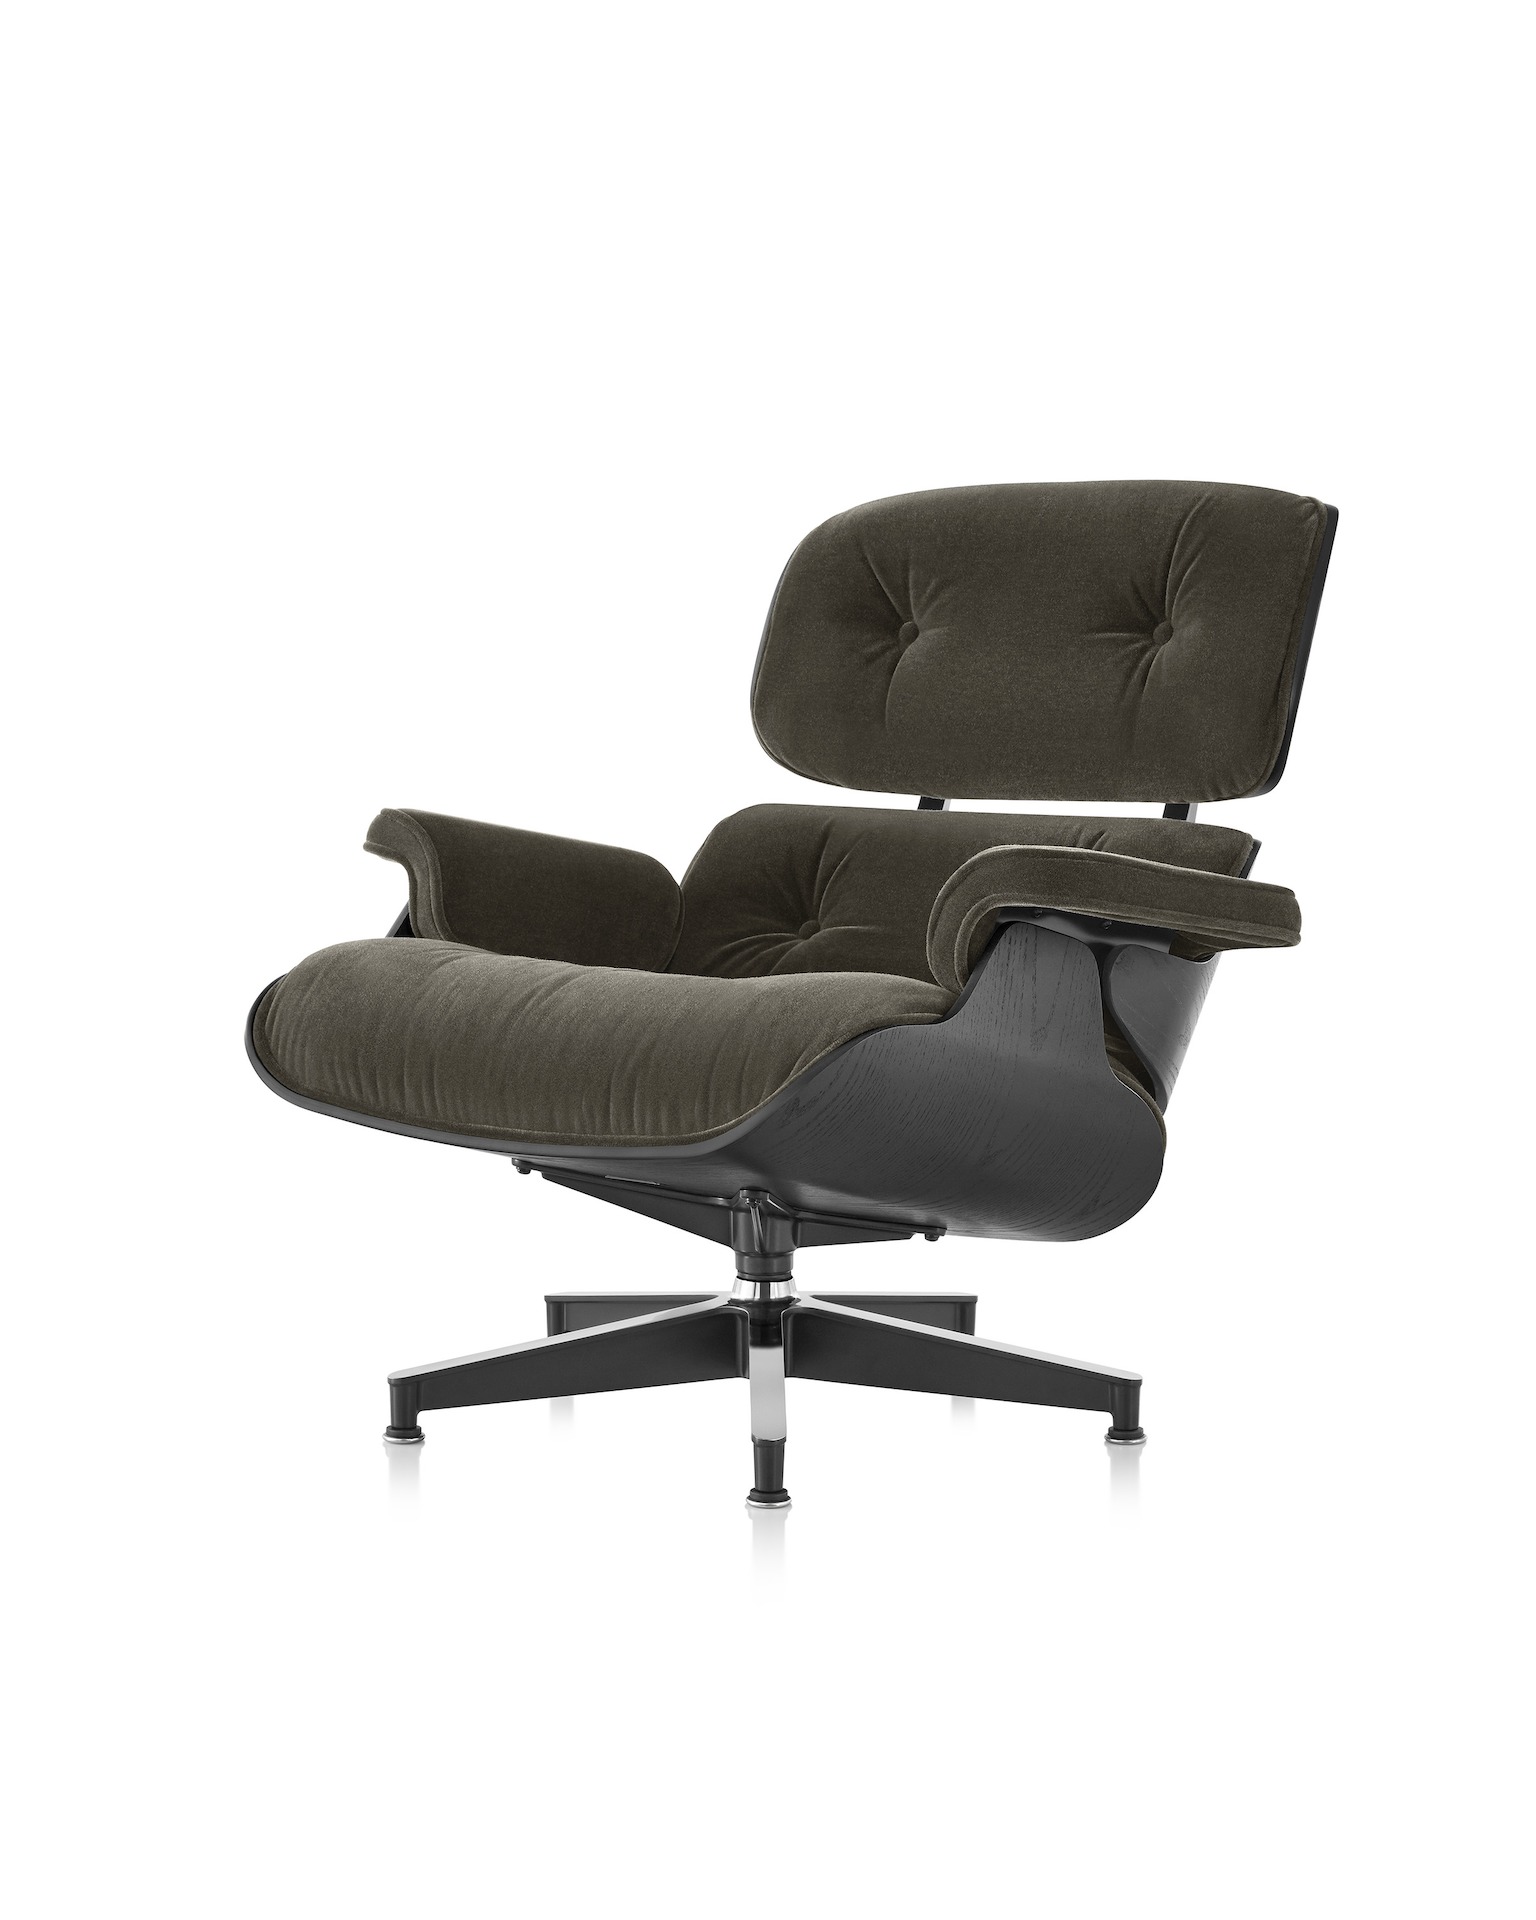 Eames Lounge Chair Tall 3d Product Models Herman Miller